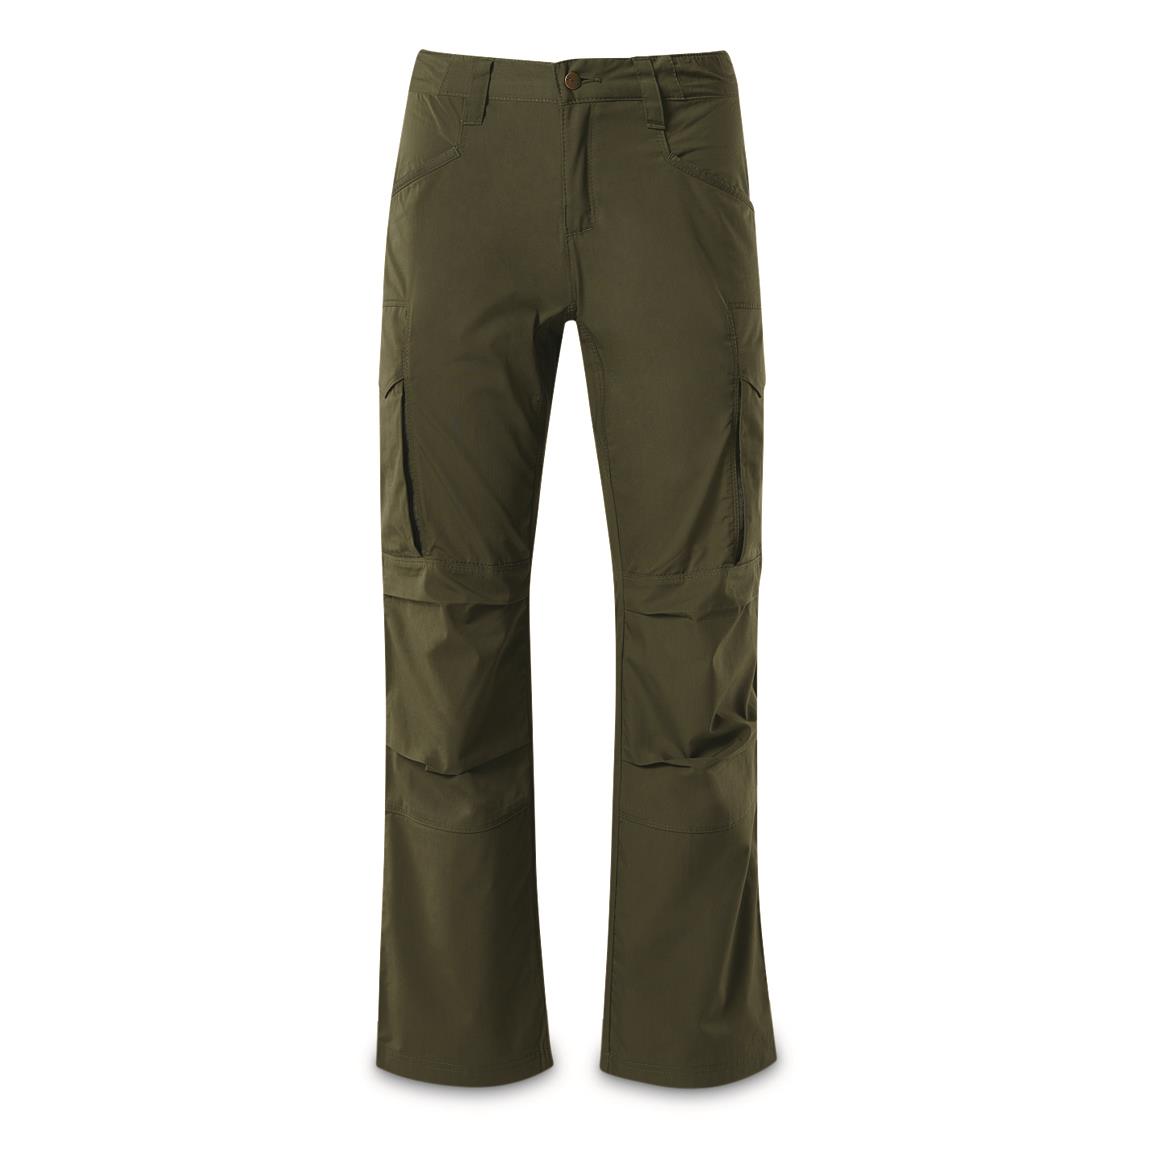 Vertx Women's Fusion LT Stretch Tactical Pants, Olive Drab Green